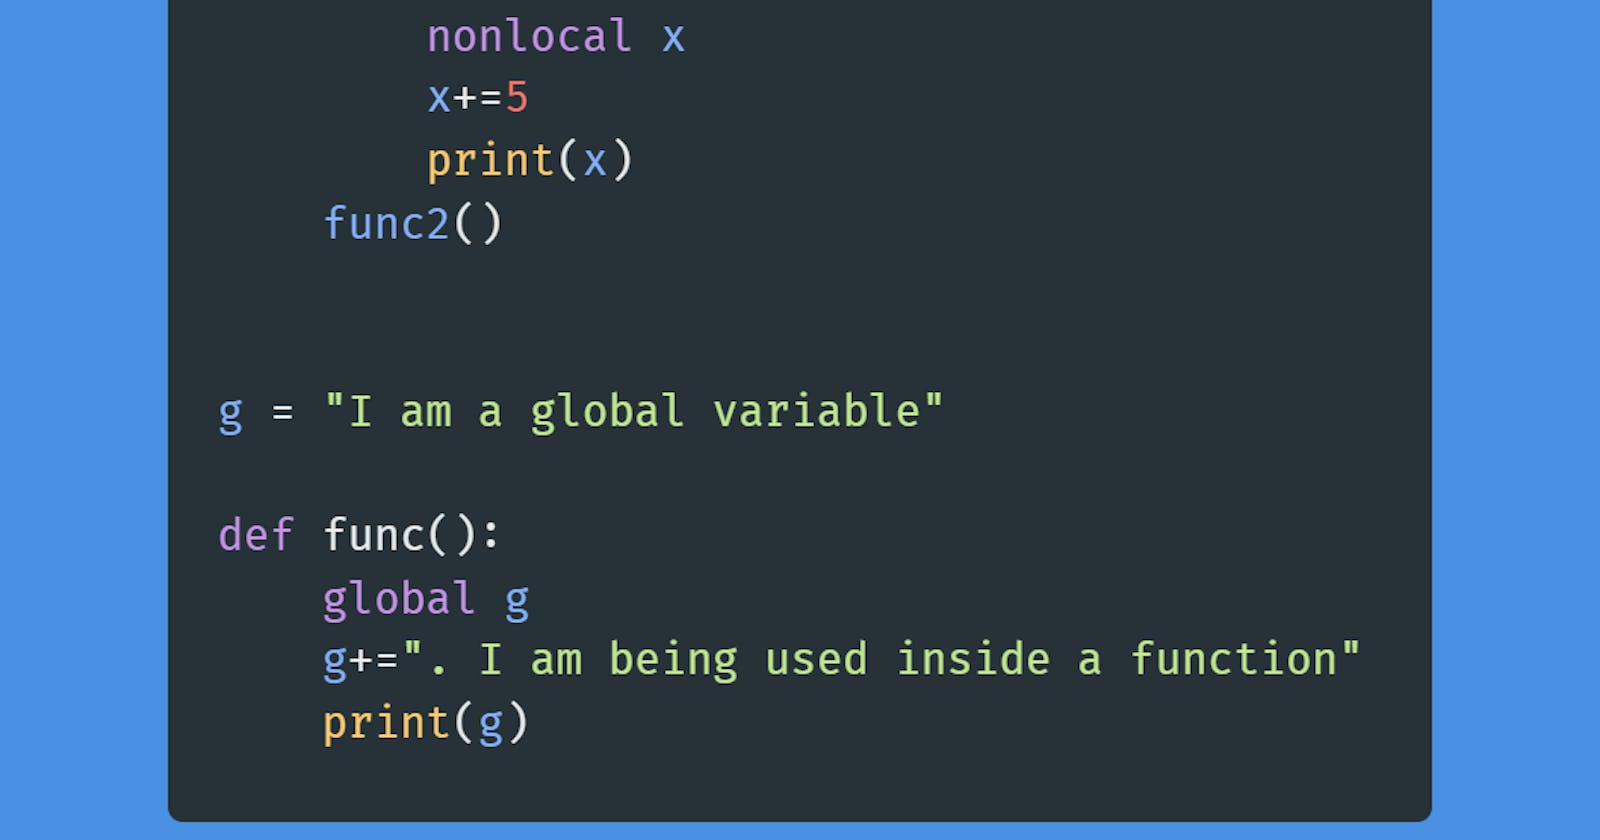 #Day1 - Nonlocal and Global Keywords in Python